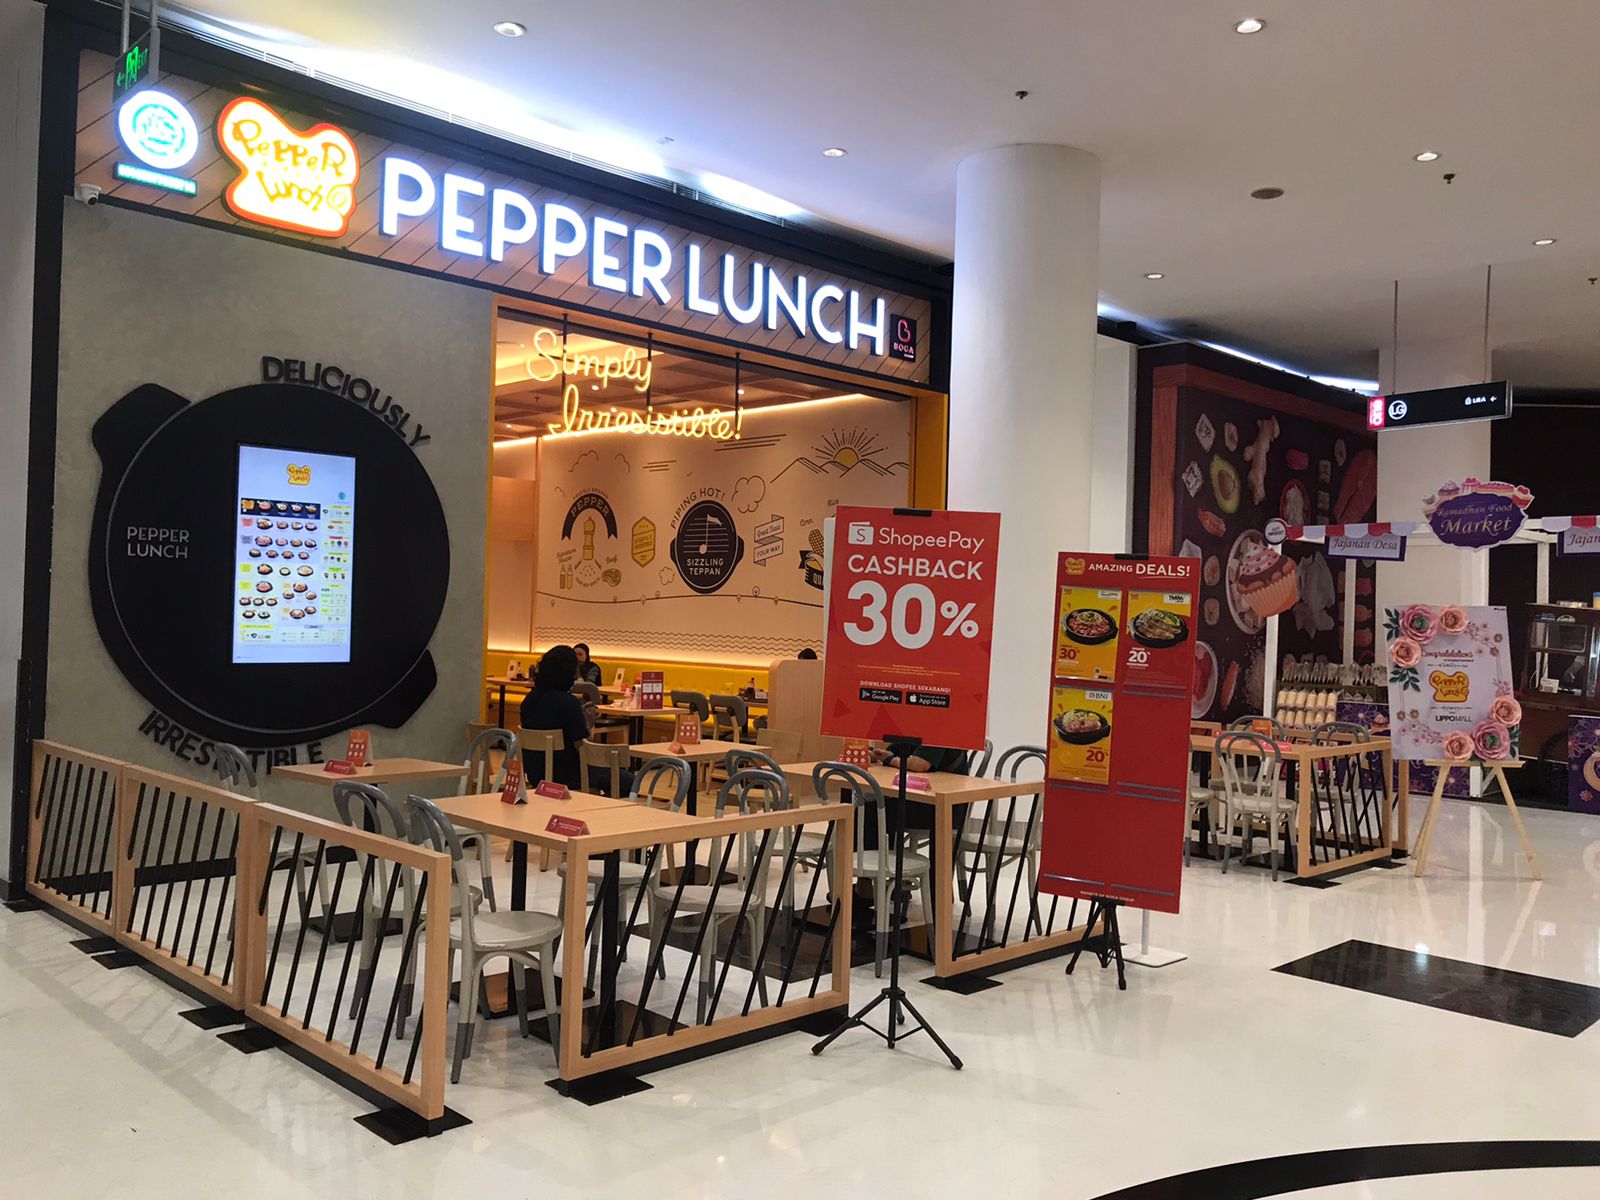 Pepper Lunch shop front in lippo mall puri st. moritz